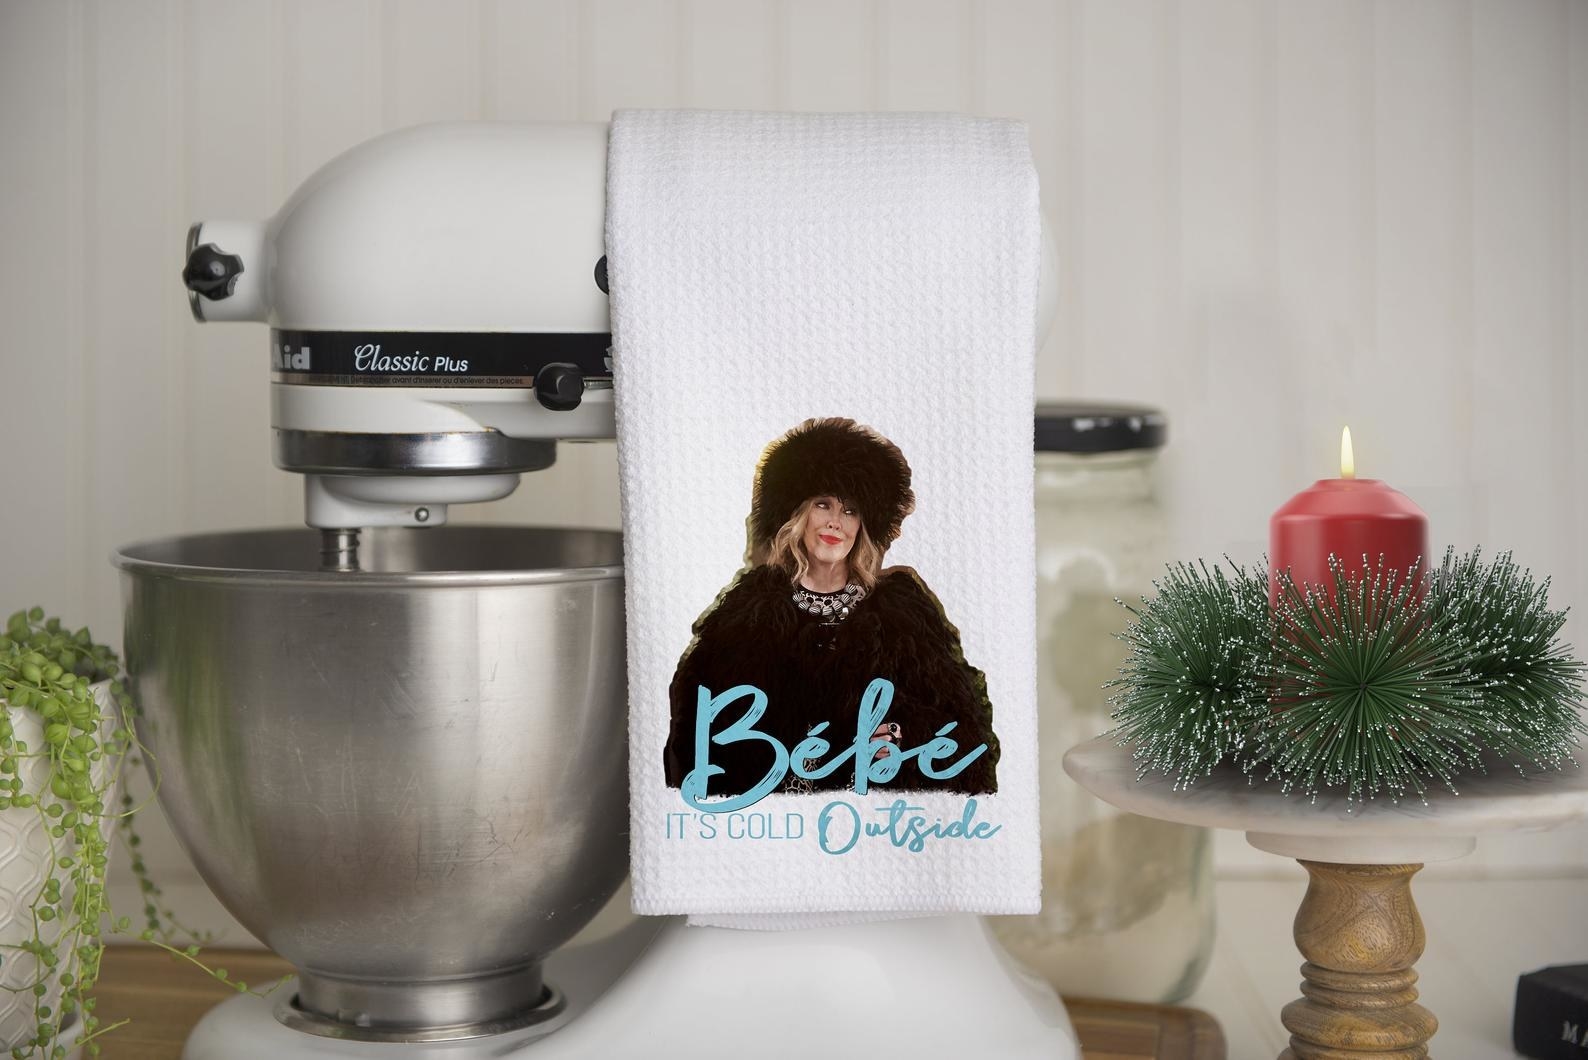 The waffle towel with an image of moira rose and text &quot;bébé it&#x27;s cold outside&quot;